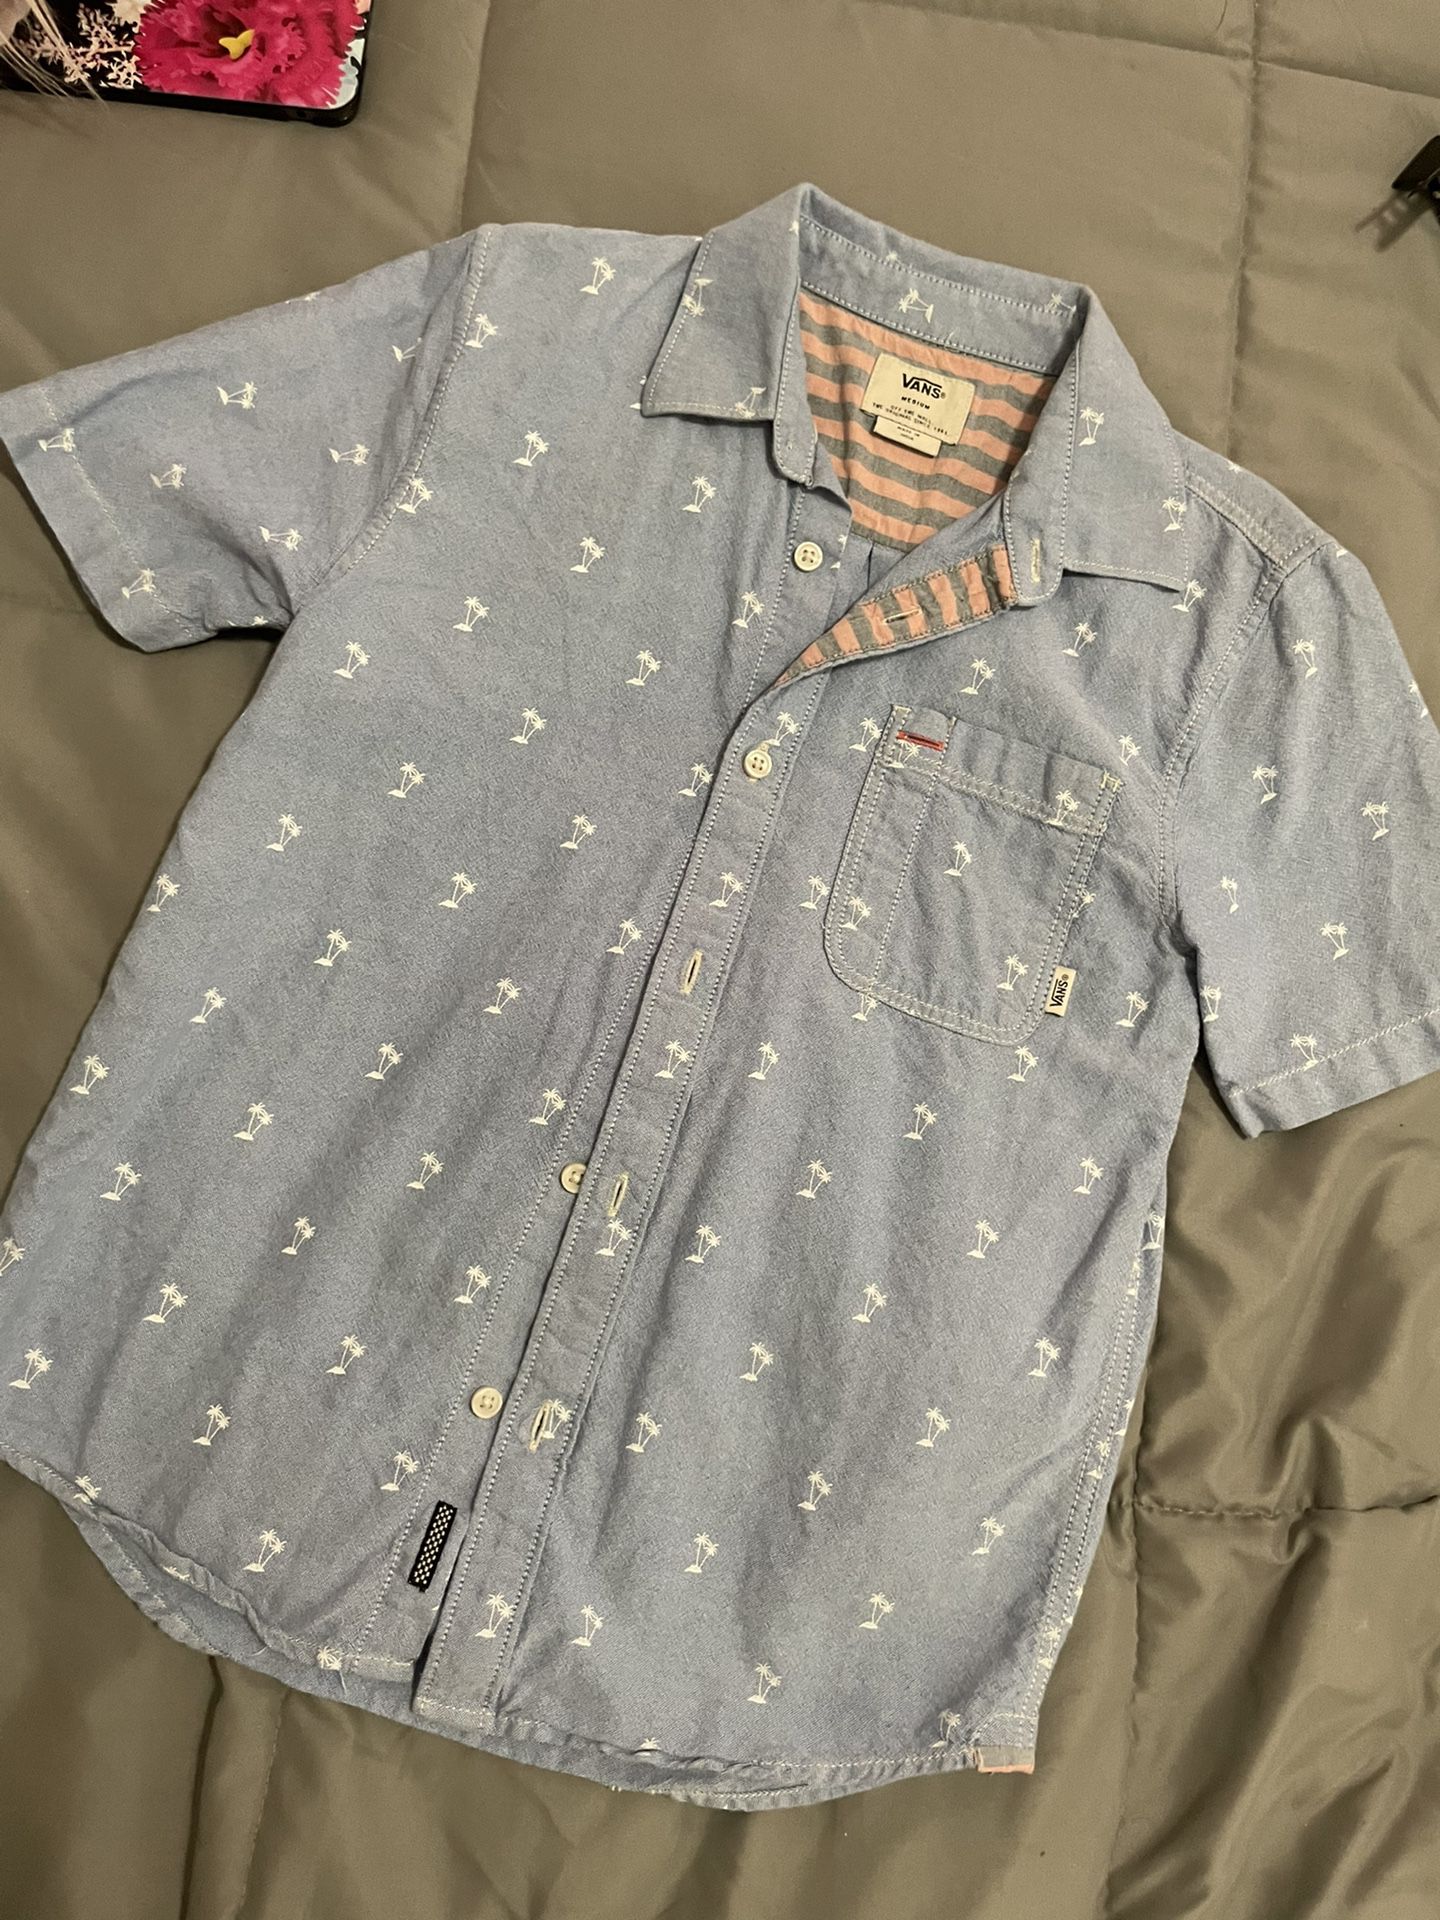 Vans Boys Button Up Like New Size m